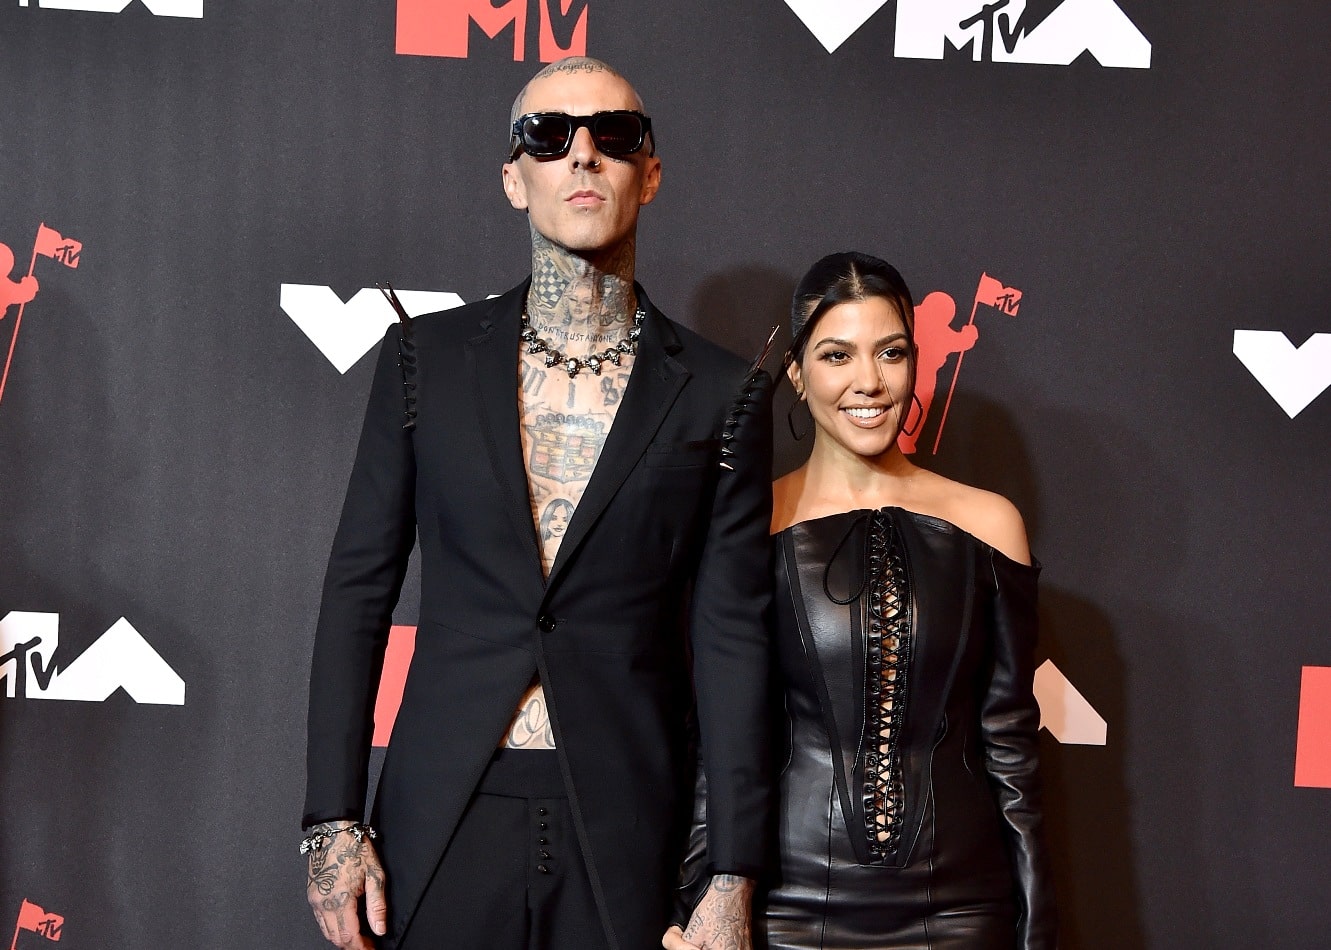 Travis Barker Hospitalized for Undisclosed Health Issue With Wife Kourtney by His Side as Daughter Alabama Asks Fans for Prayers